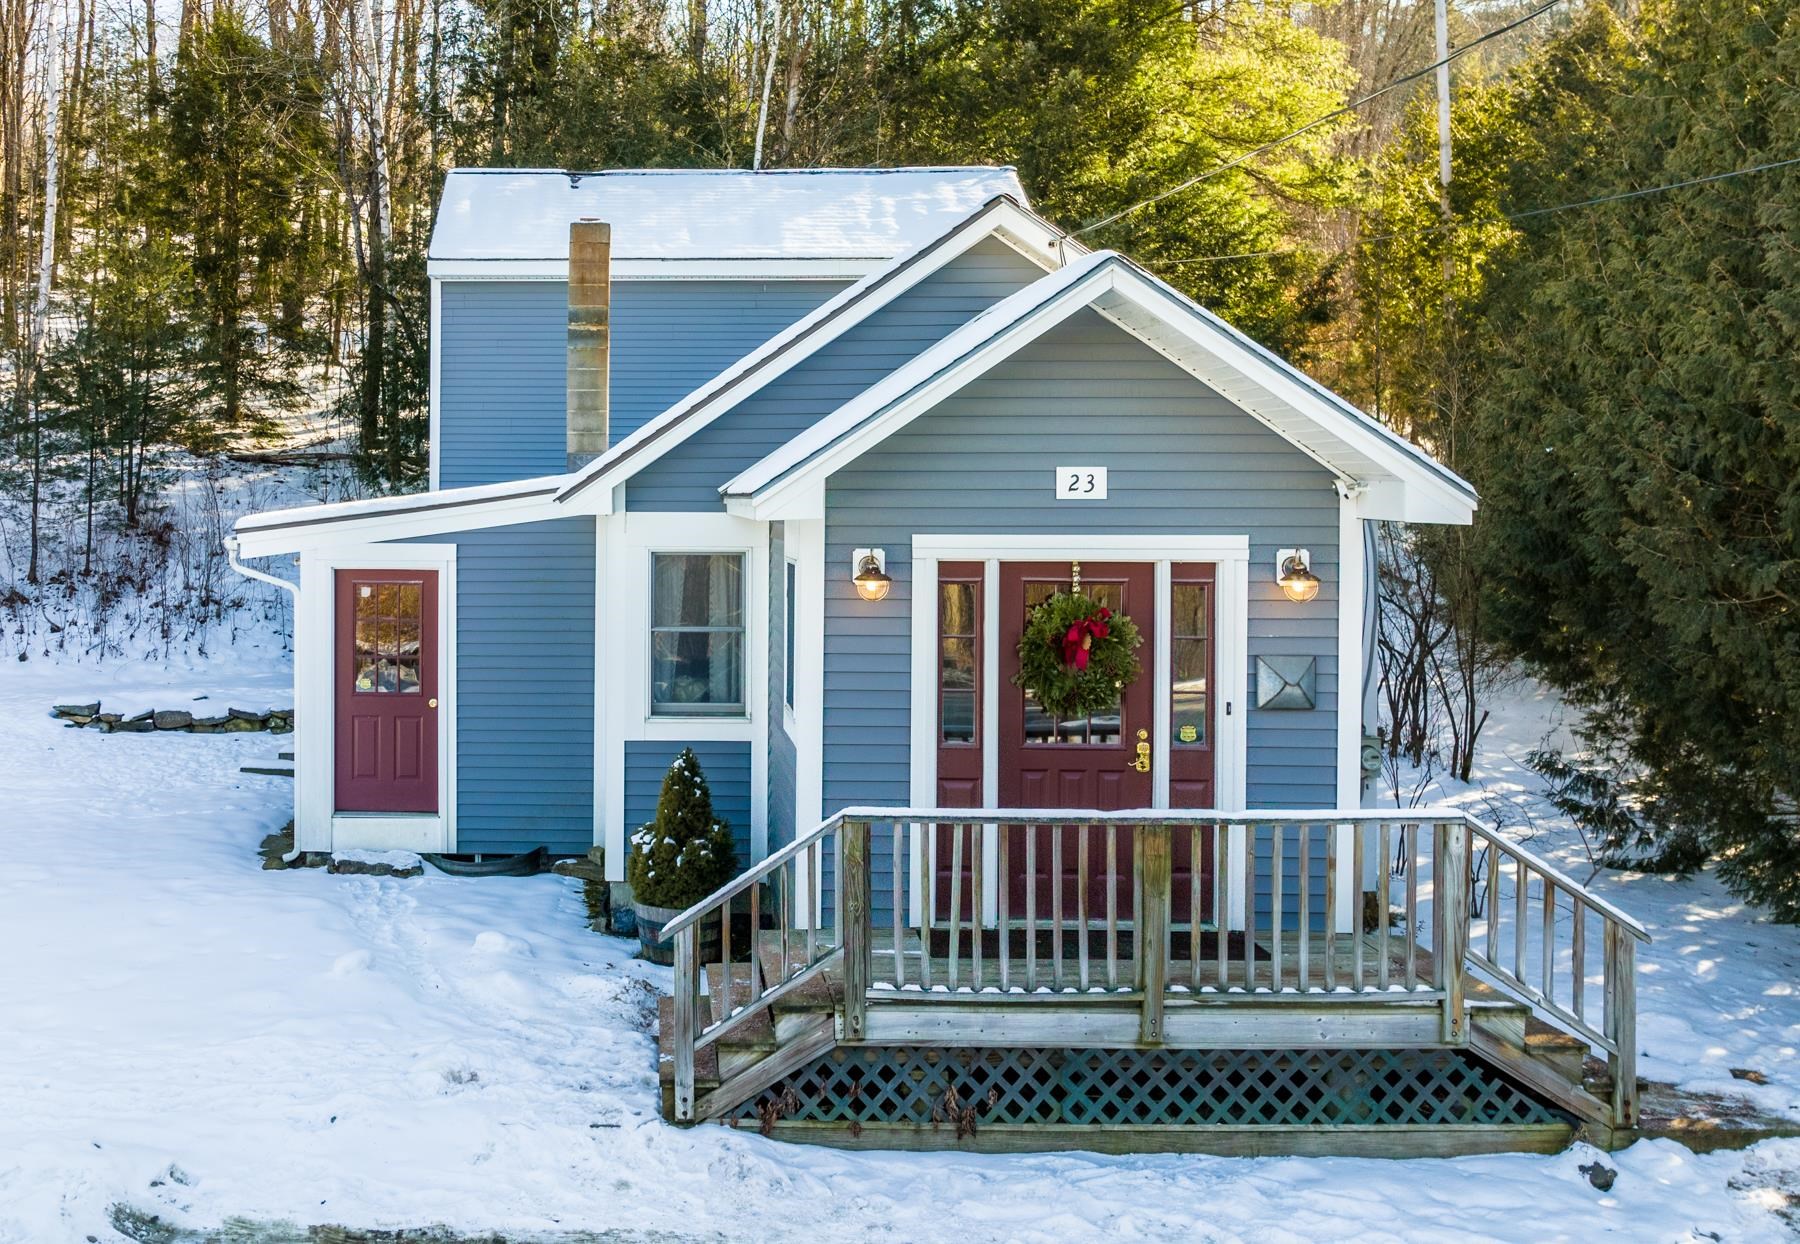 A rare opportunity to buy this updated charmer. 15 minutes from the slopes of Okemo and a short distance to I-91. If you are looking for a home that has been meticulously updated and cared for, this is the one. Currently two bedrooms and a den (that could be converted to a third) plus large great room, beautiful kitchen with modern appliances and large bathrooms. Perfect for a full-time residence or vacation home. Hardwood floors throughout plus tiled bathrooms make this a fabulous turnkey opportunity. Showings are delayed until Saturday January 29th as owners work remotely from home and cannot have the house shown during the work week.